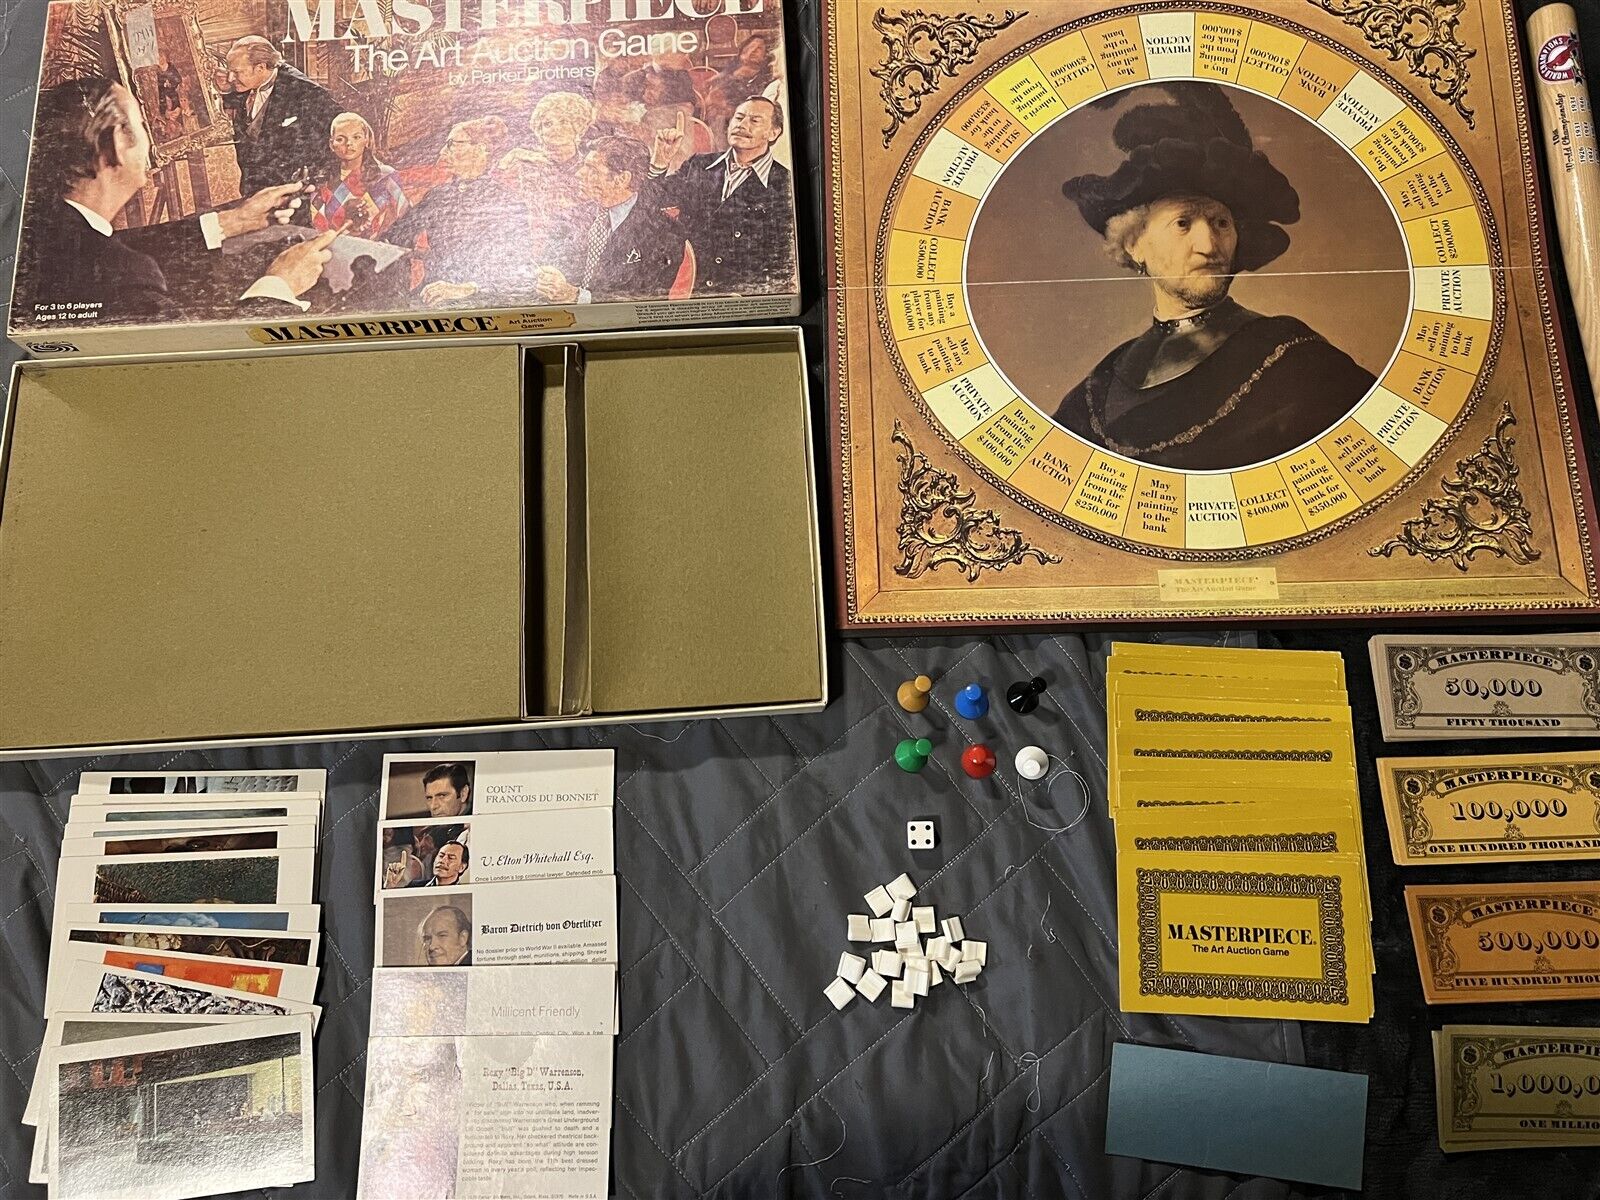 VINTAGE MASTERPIECE THE ART AUCTION BOARD GAME BY PARKER BROTHERS 